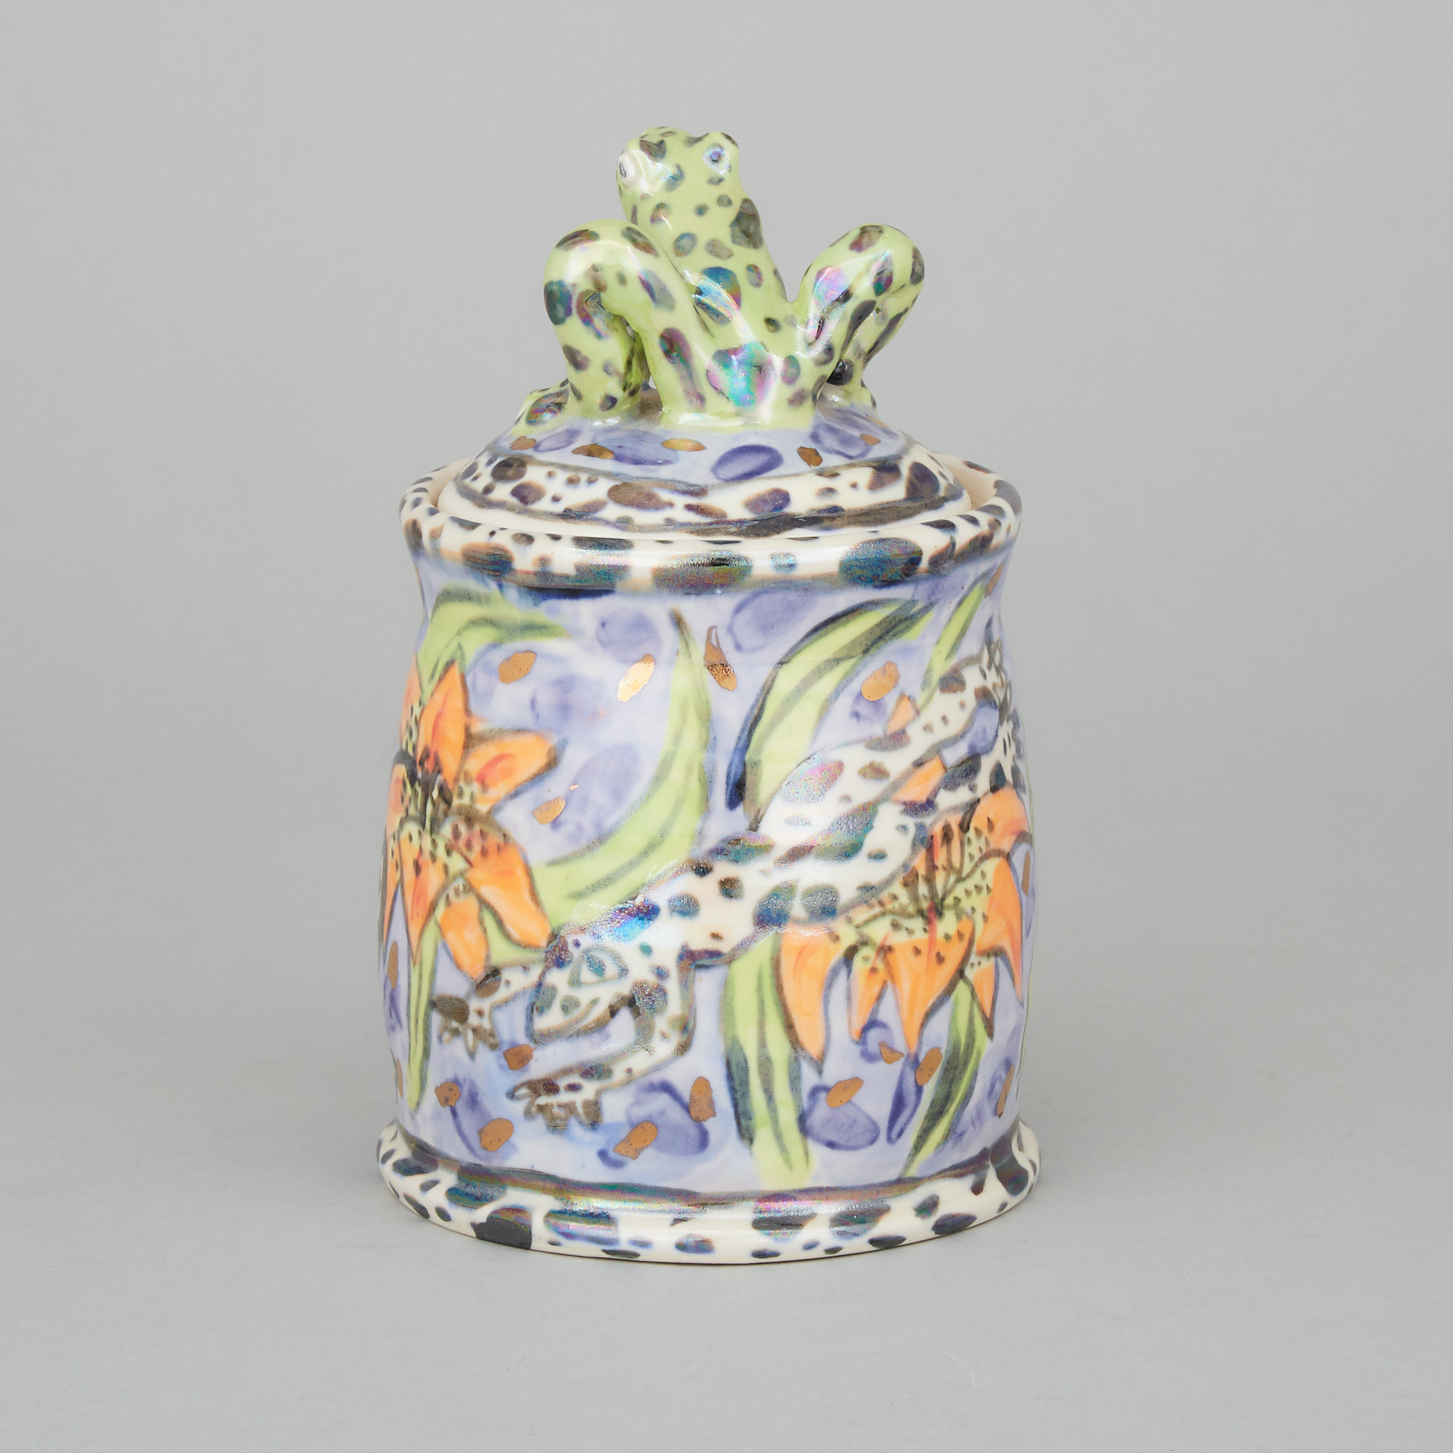 Ray Mackie and Debra Kuzyk (Canadian, b.1949 and 1958), Iridescent Covered Frog Jar, 1996